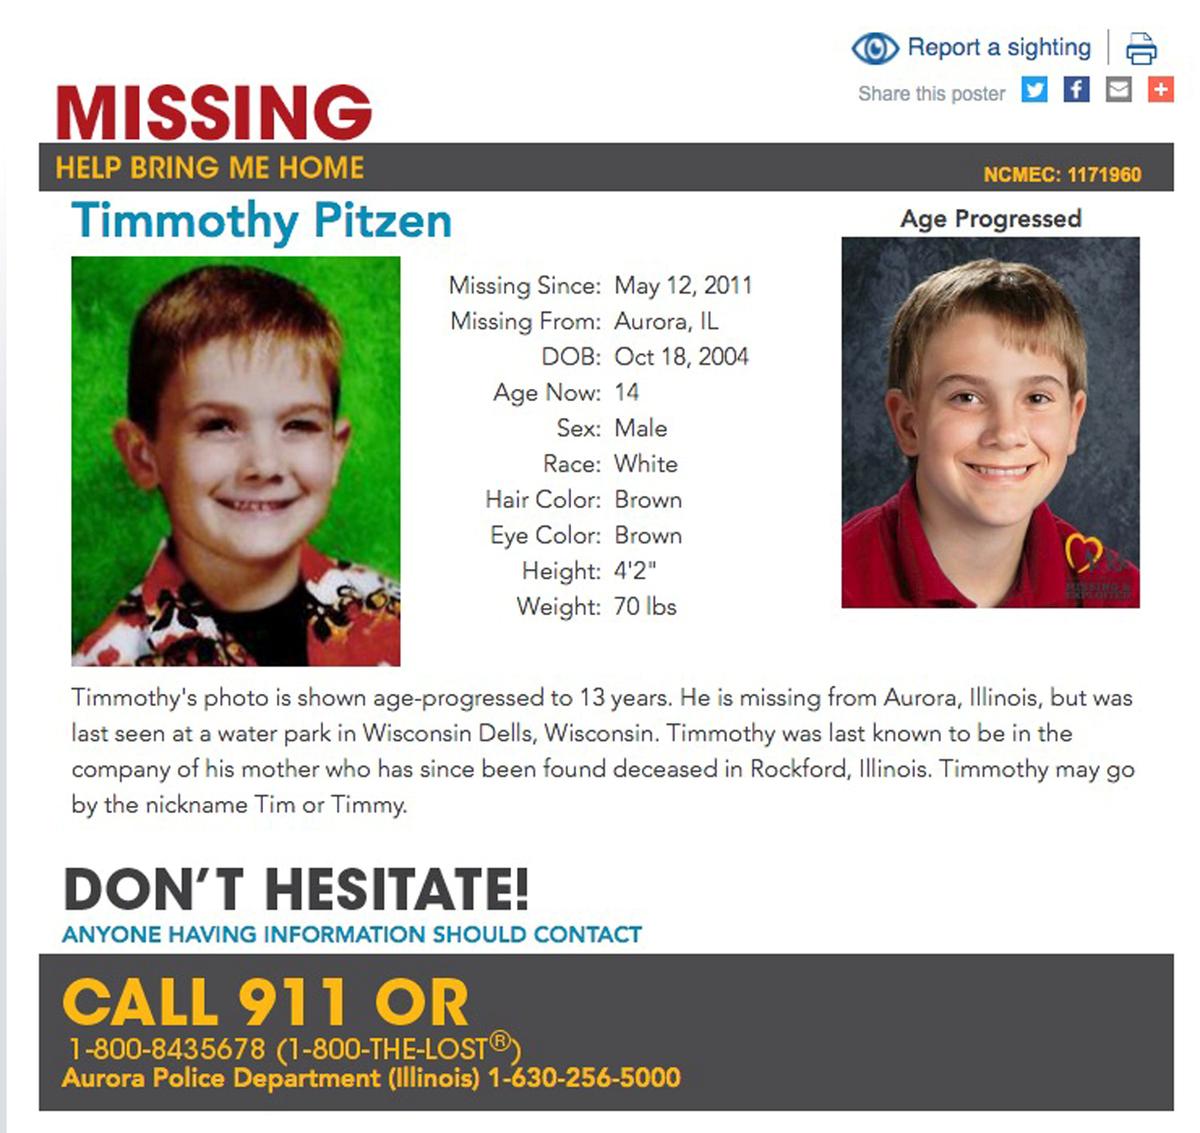 [NEWS] Imposter who said he was missing Illinois boy charged by U.S. prosecutors – Loganspace AI